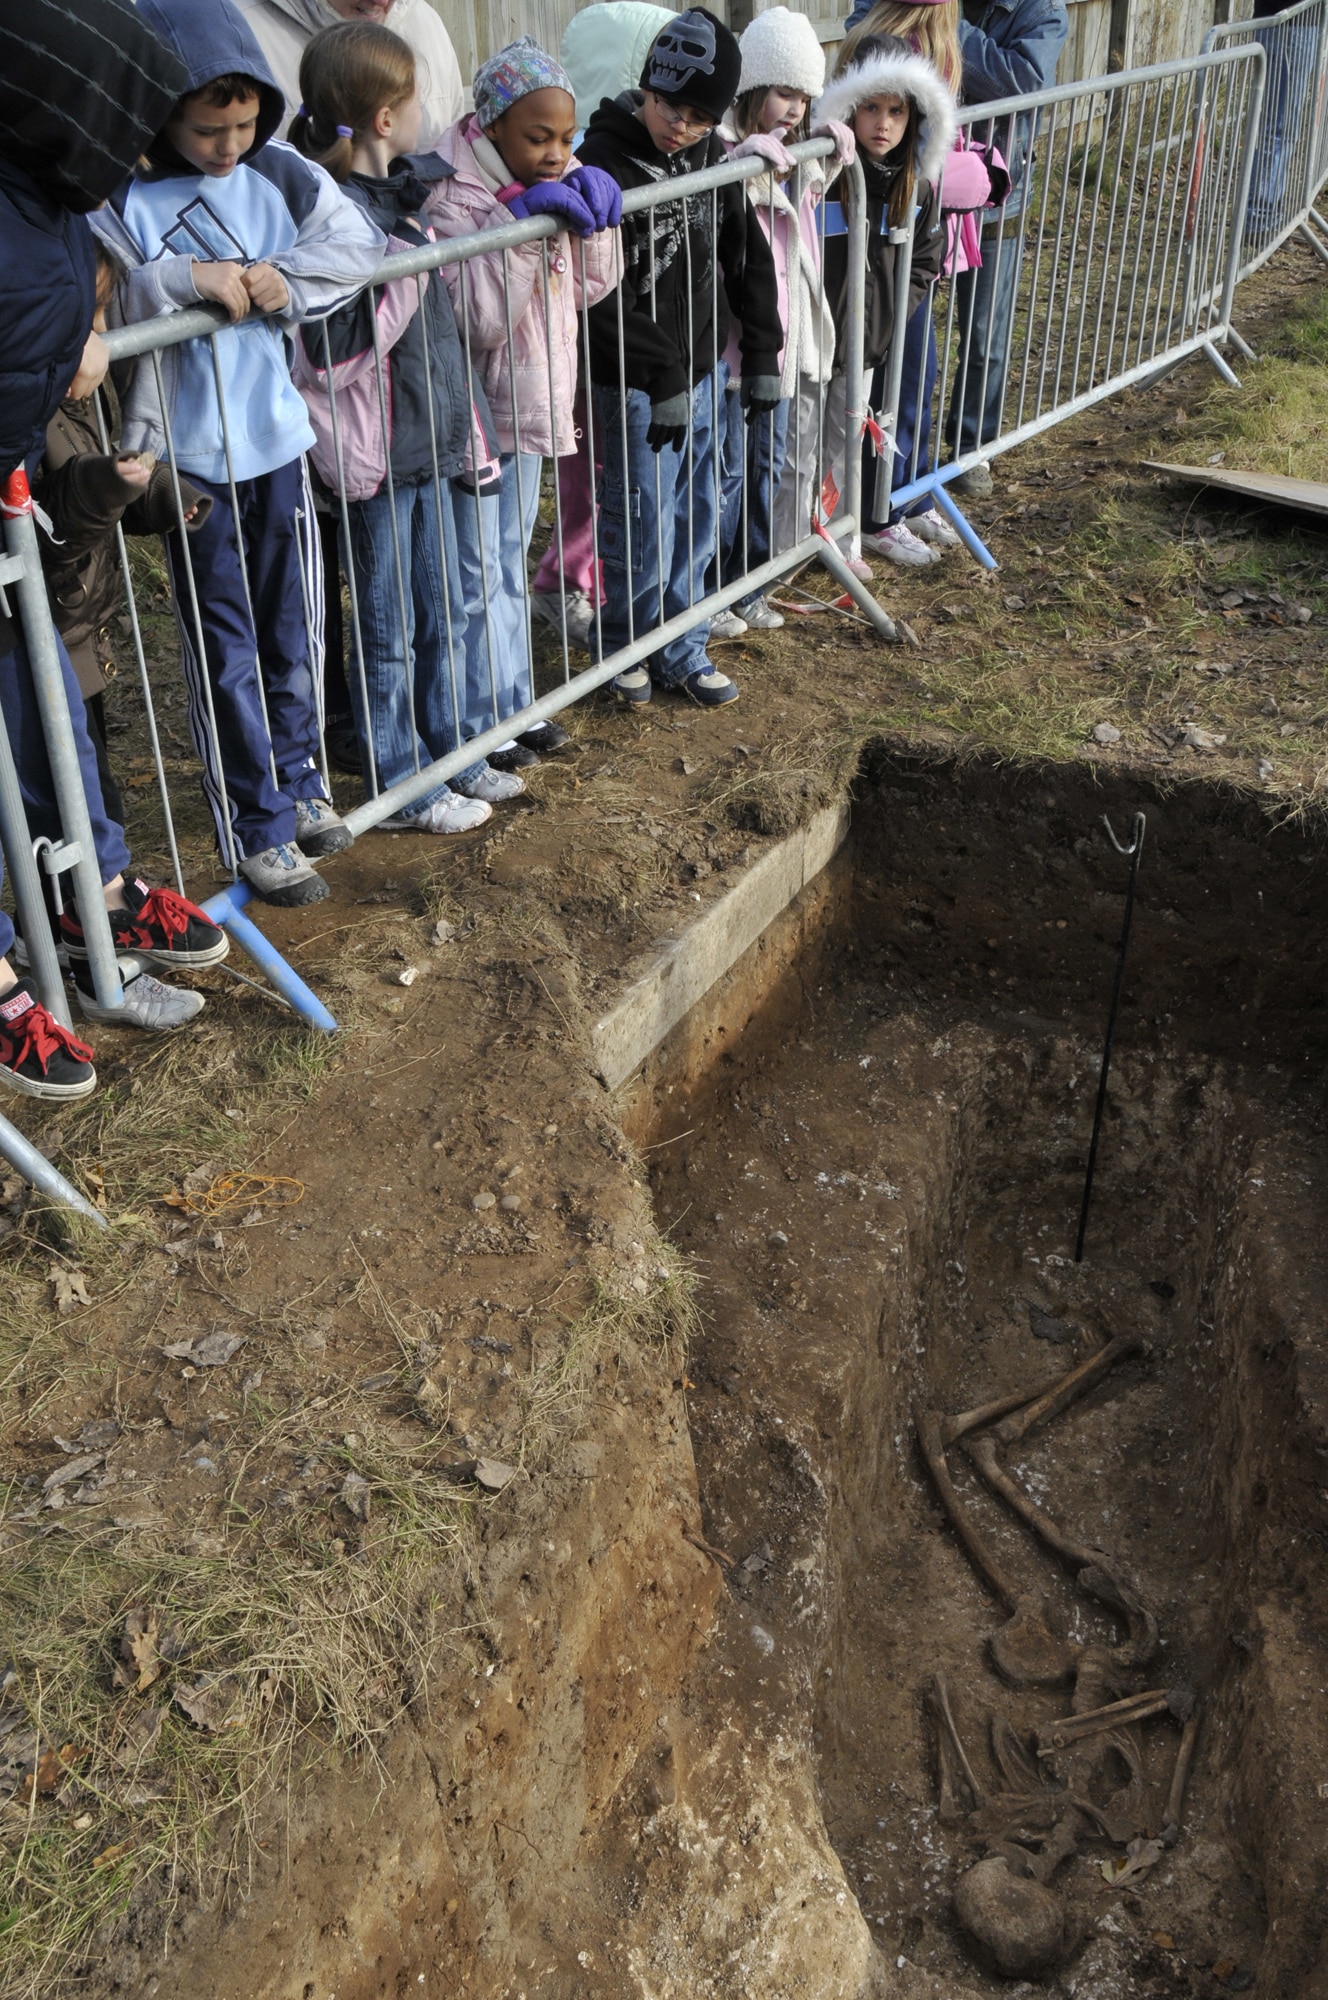 Elementary students look in awe at the 2,000 year old graves Nov 21 at RAF Lakenheath, England. The Suffolk County Council Archaeological Service community liaison has conducted over 20 tours for Lakenheath school children. (U.S. Air Force photo by Airman 1st Class Perry Aston)